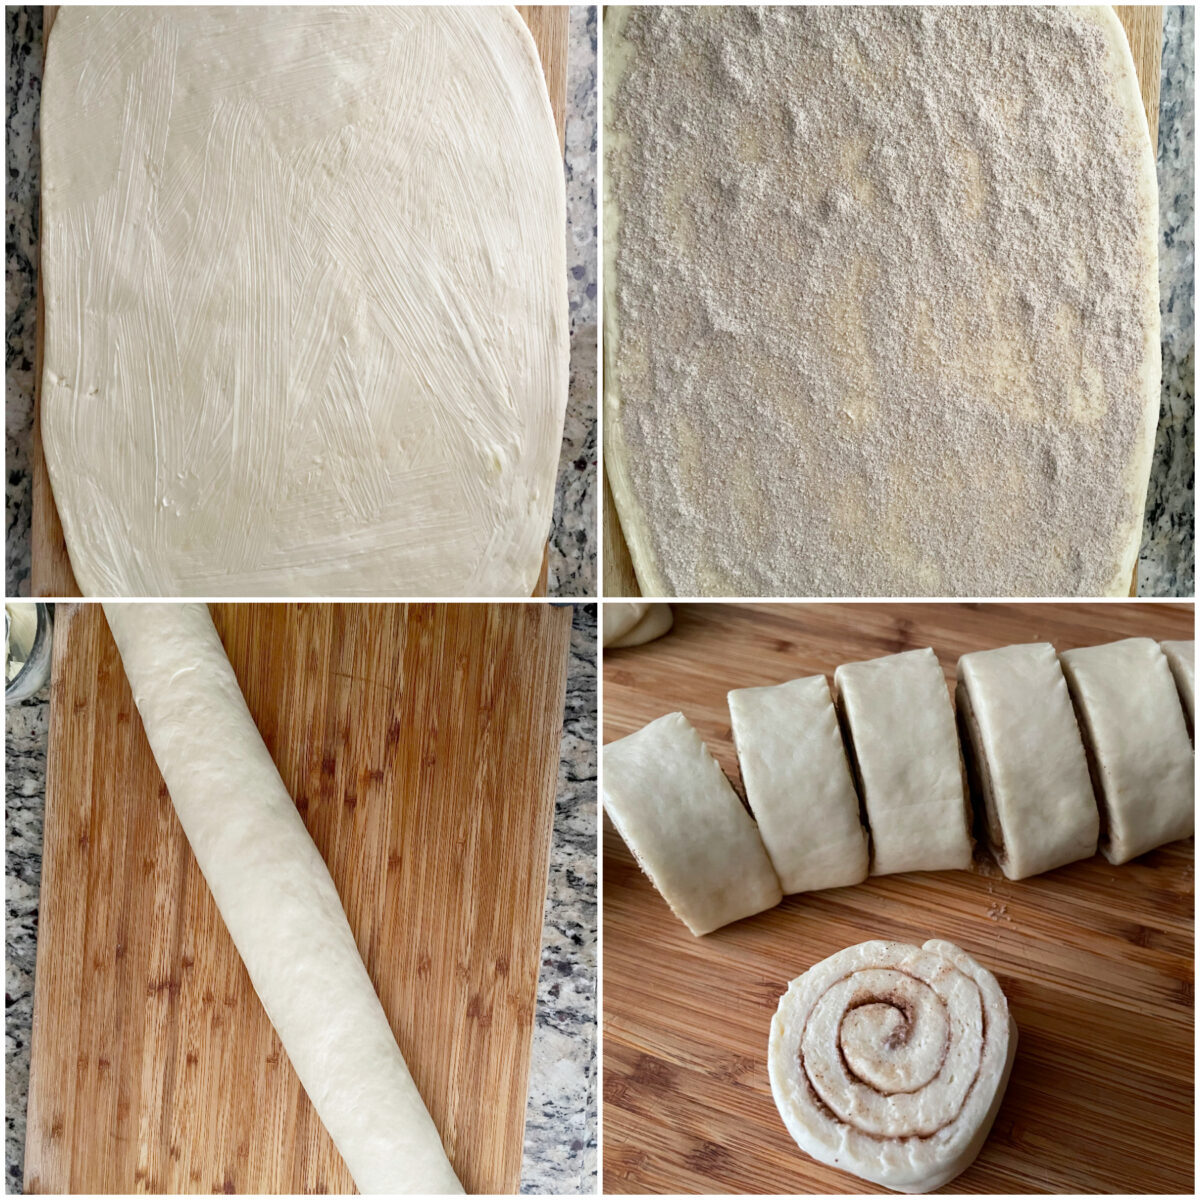 image of 4 pictures applying filling, rolling and cutting cinnamon rolls.